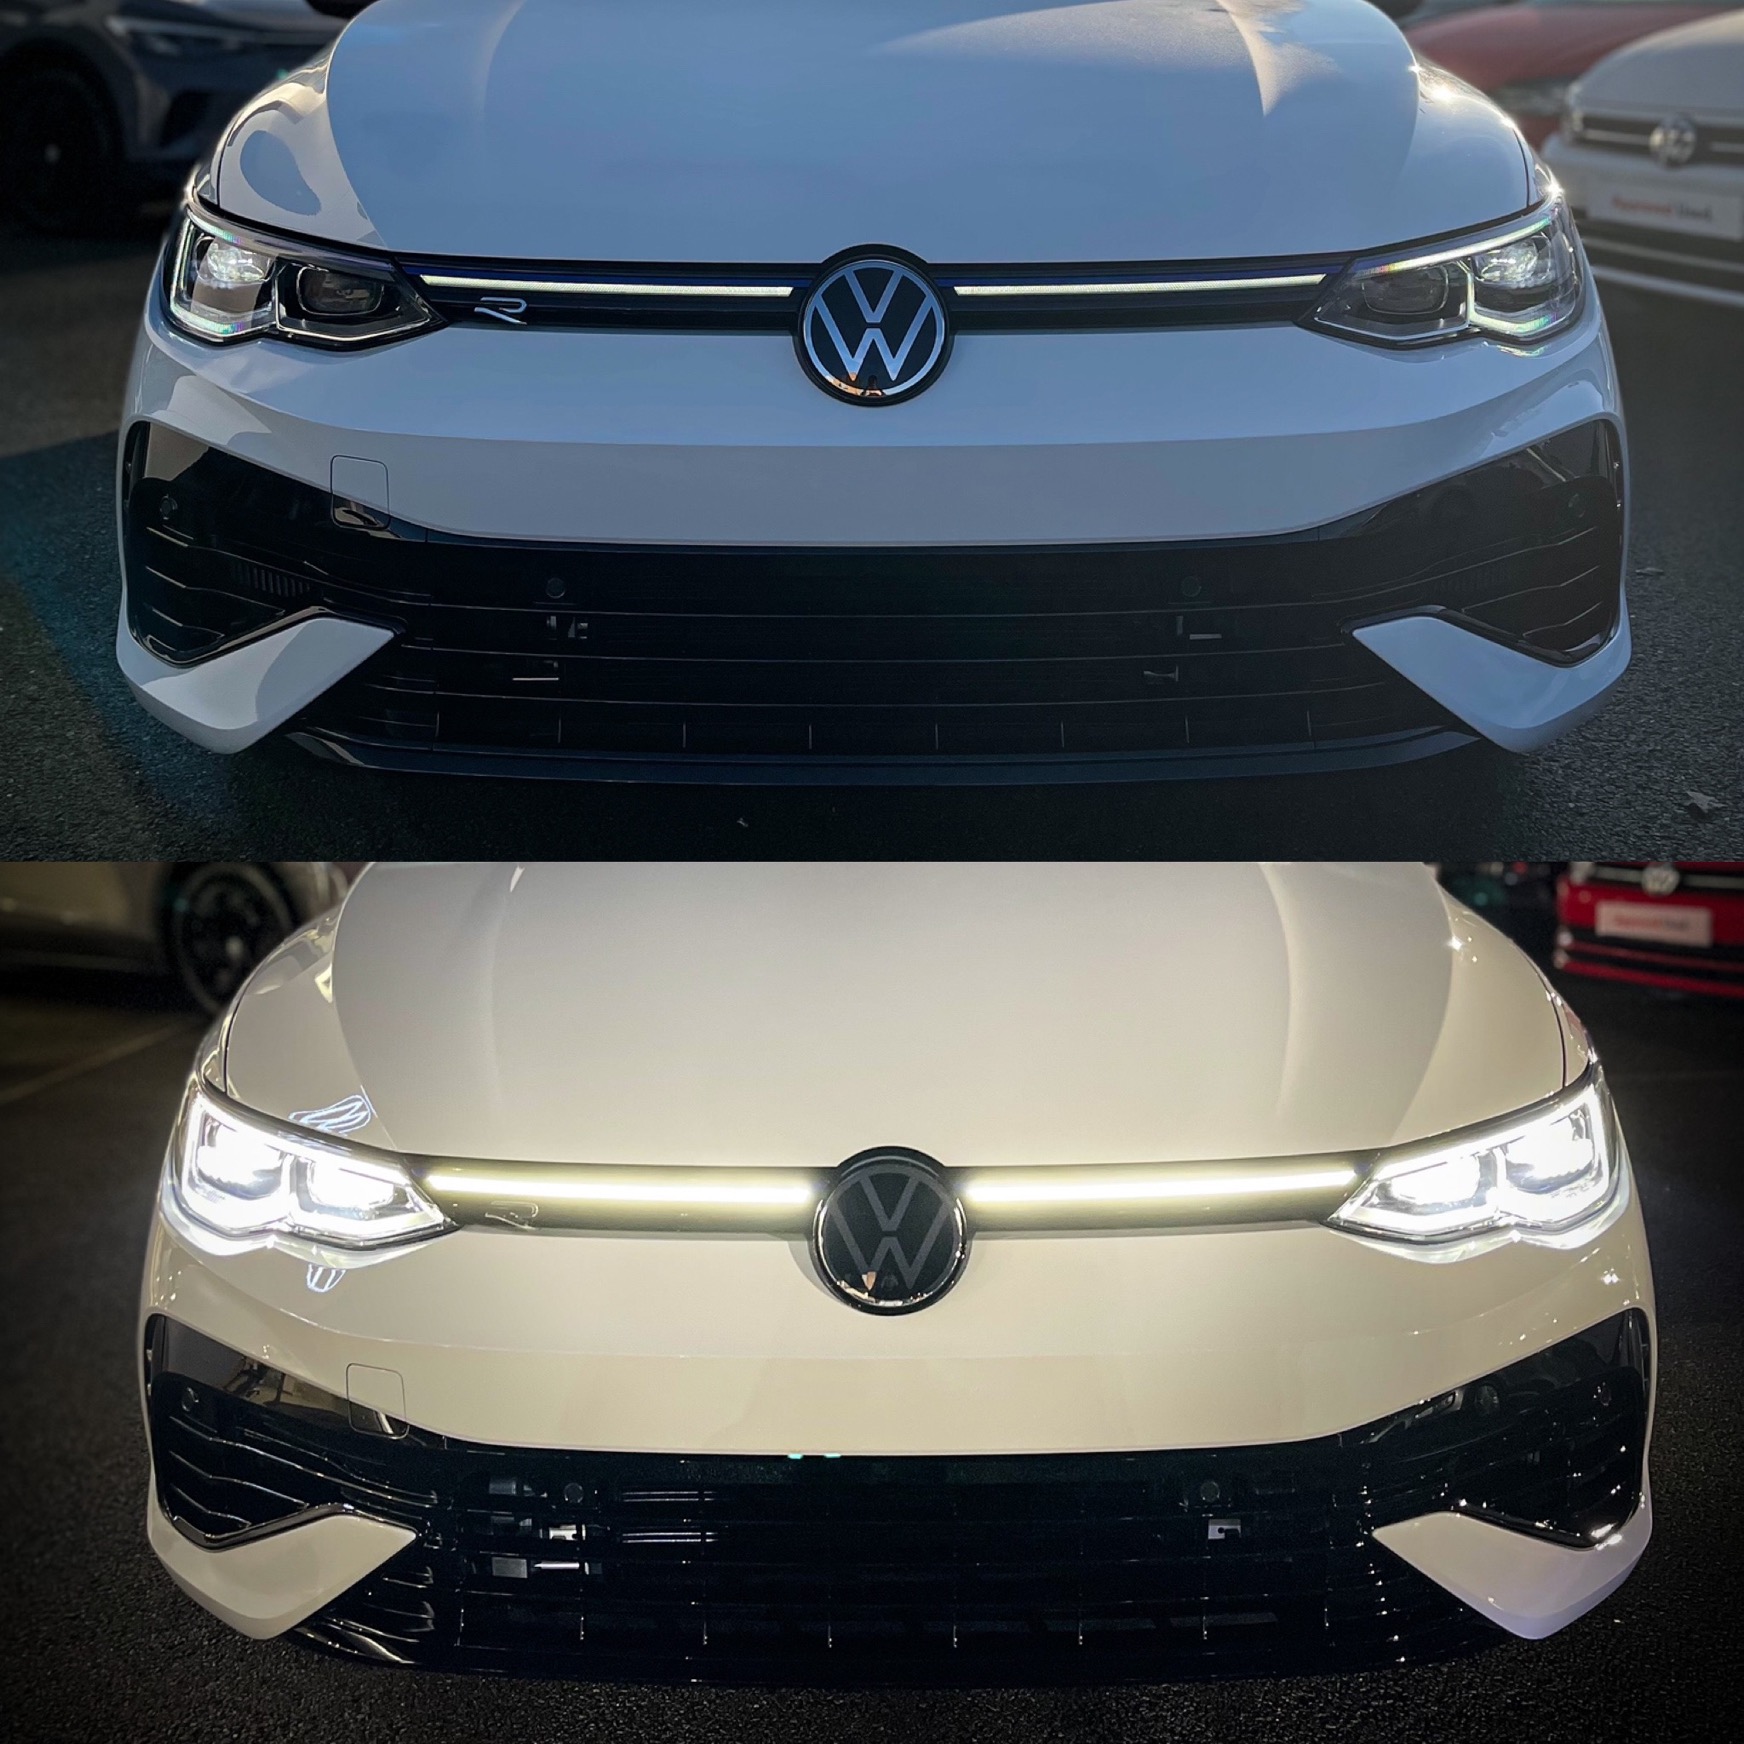 Crewe Volkswagen on Twitter: "The IQ LED lights on the #MK8 #Golf include a light bar running across the of car. Are you a fan of the IQ light bar?